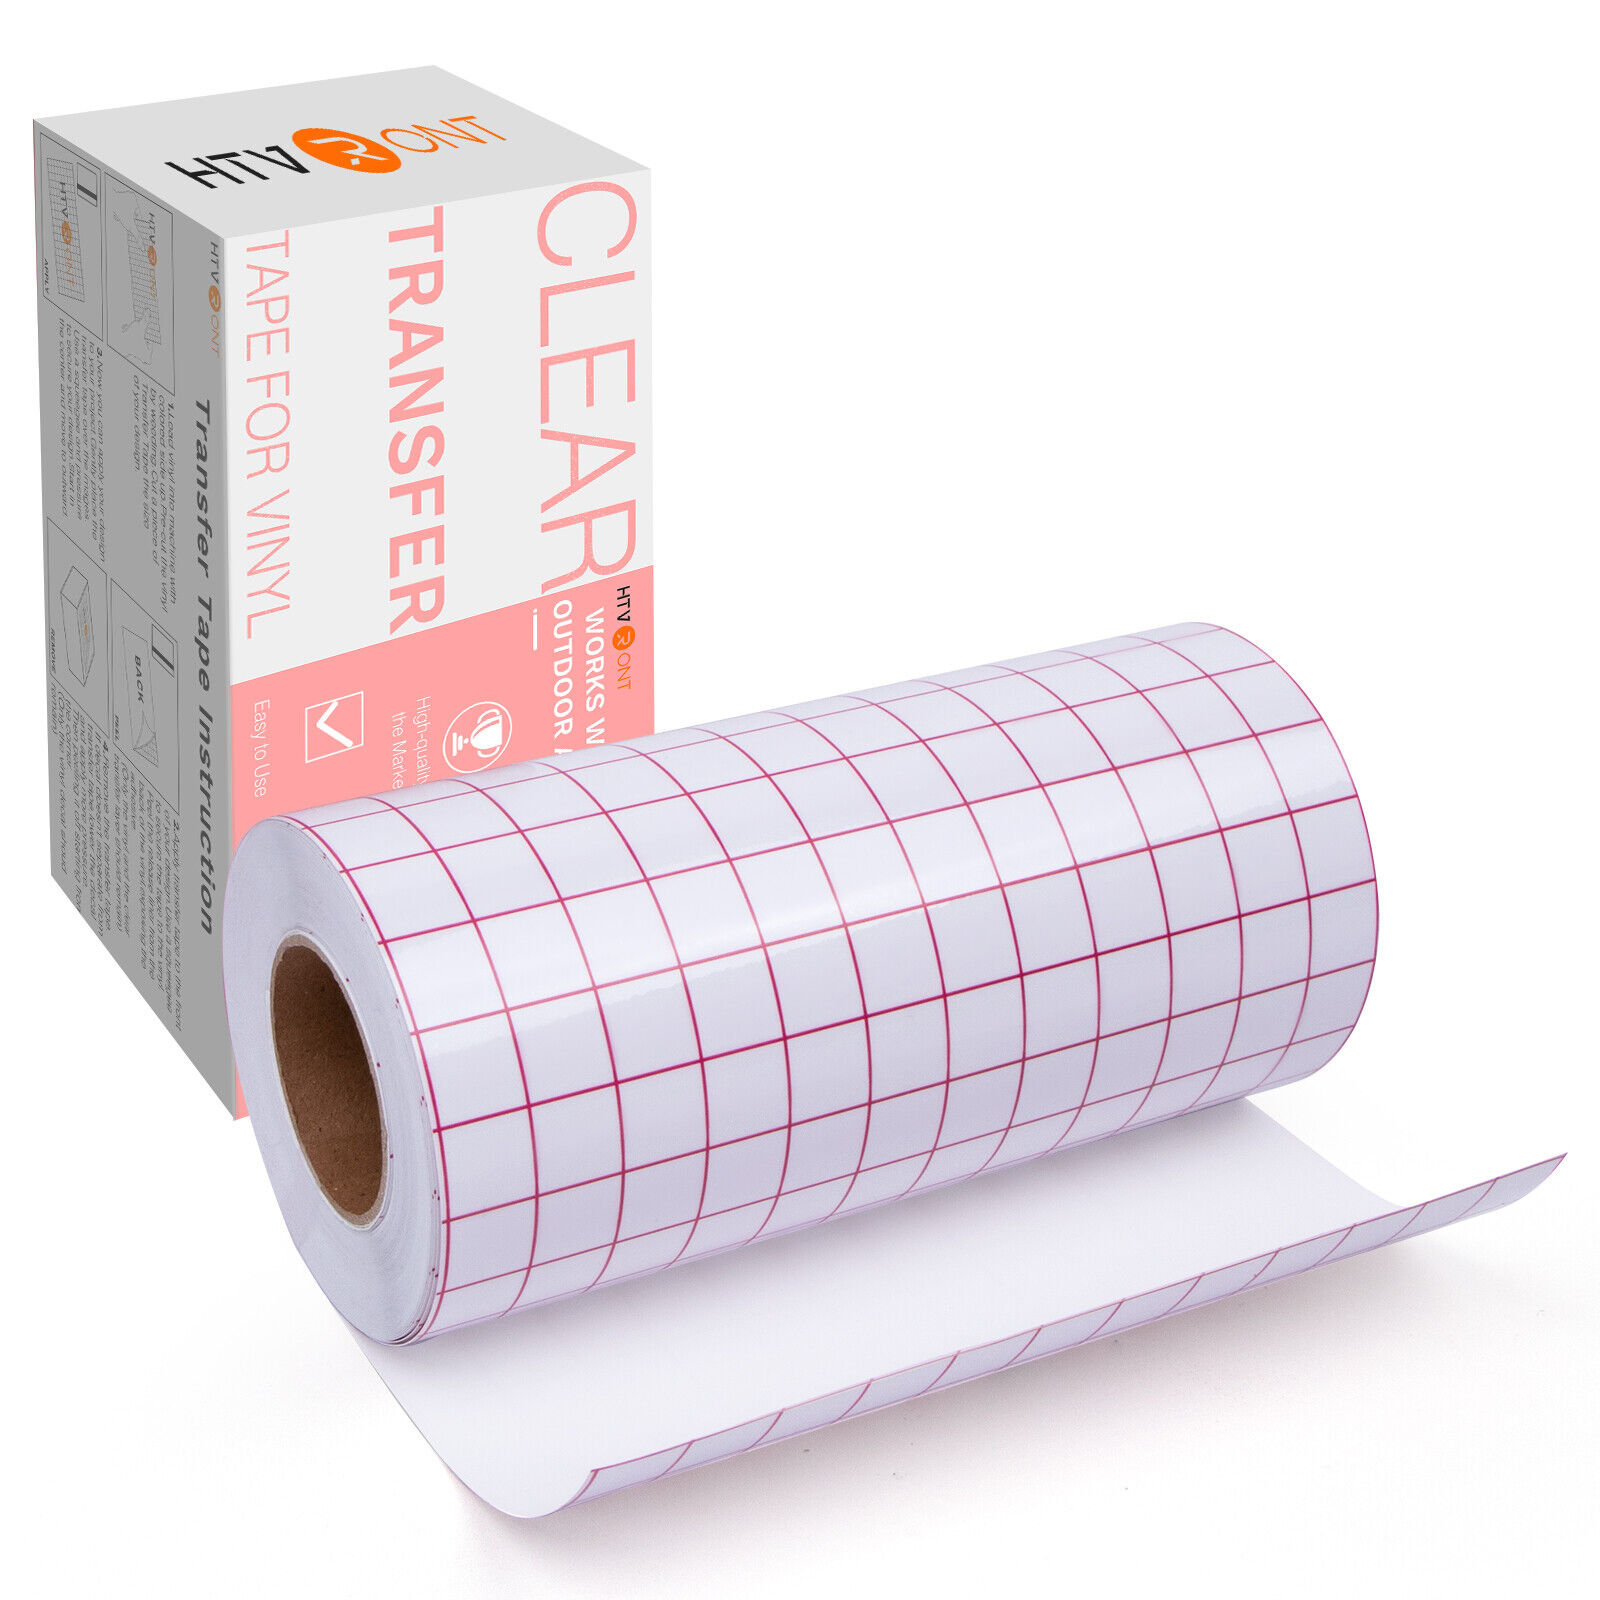 Vinyl Transfer Tape Roll Cutting Accessory HTVRONT Color: Blue, Size: 6.70 H x 3.10 W x 3.10 D